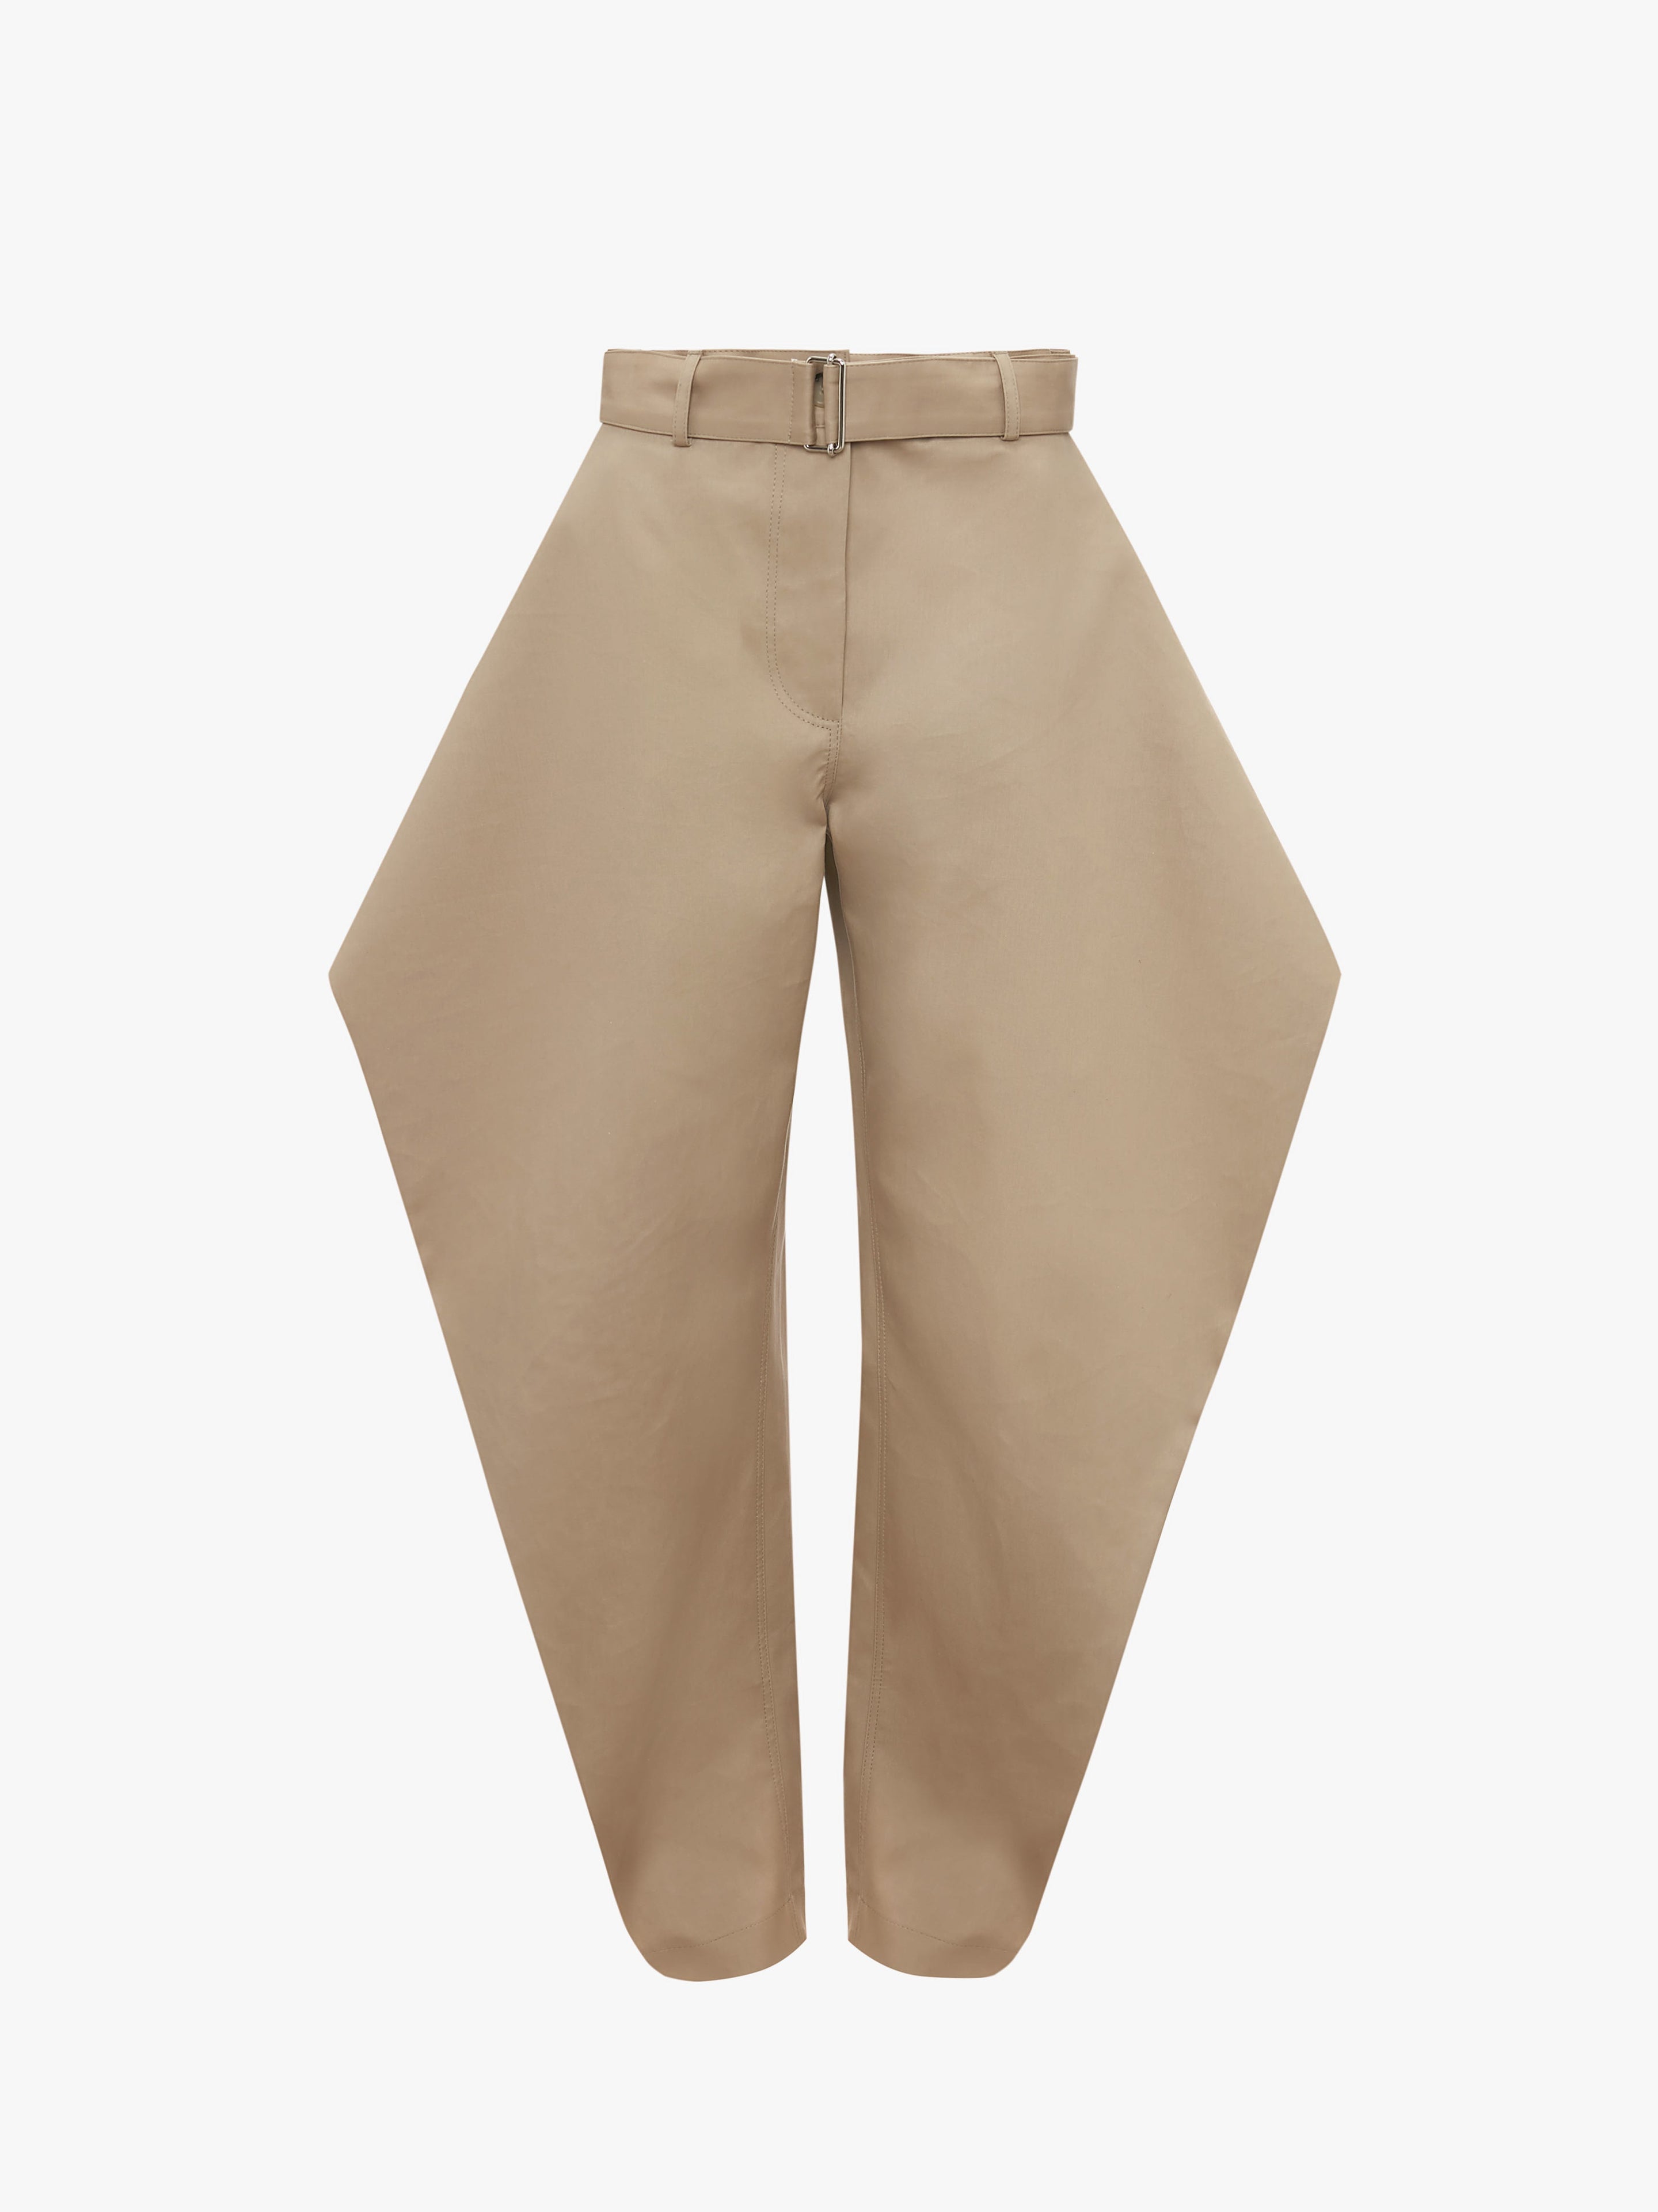 JW Anderson Kite Trousers - Flax - 9